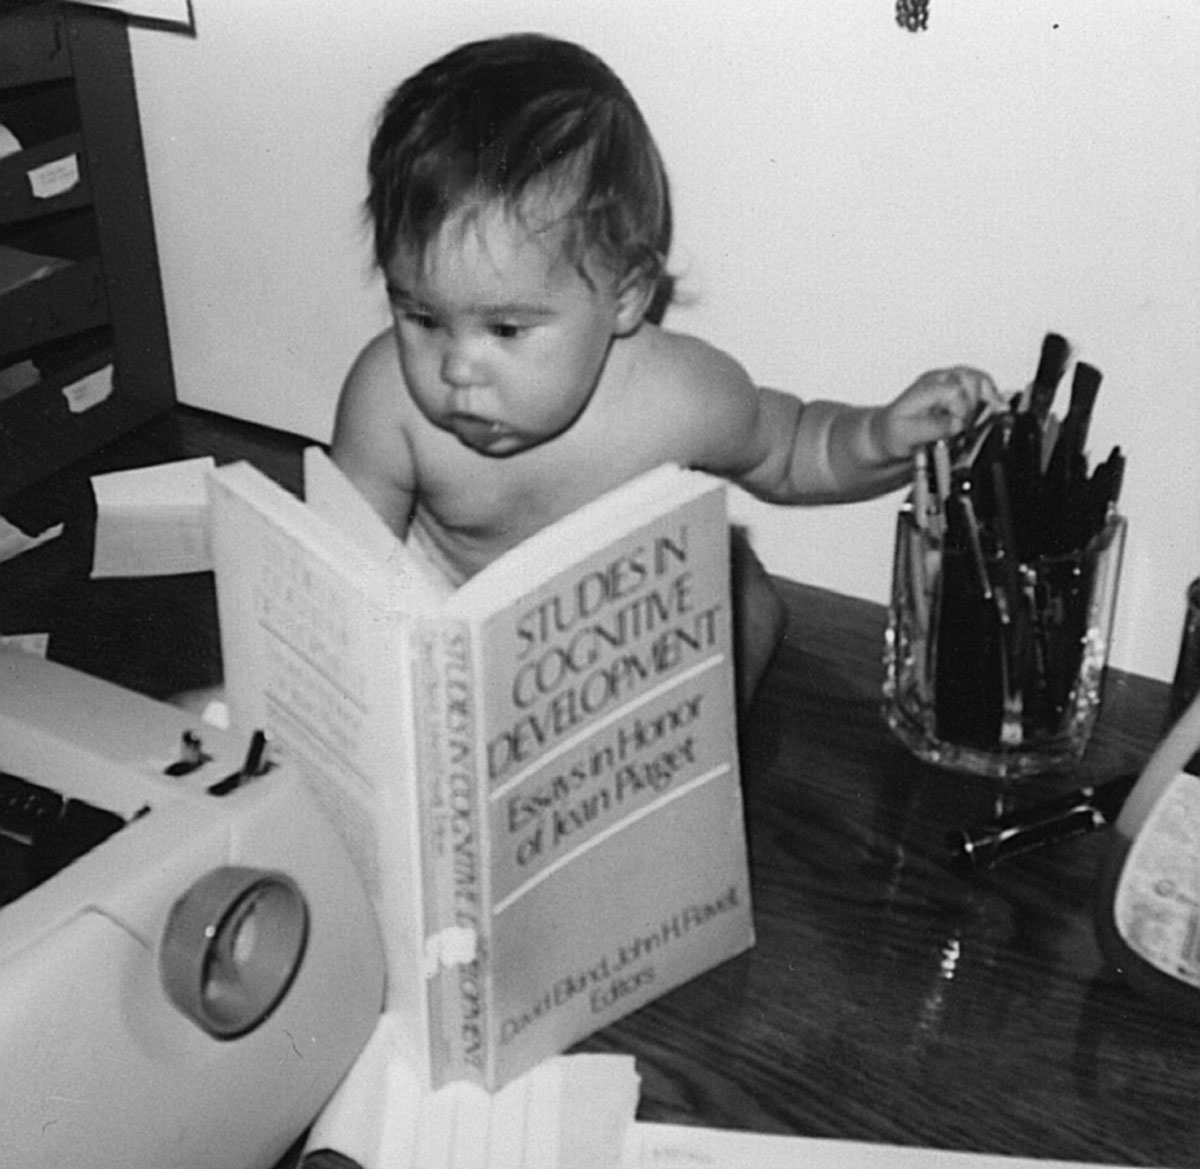 Betsy reading a Piaget textbook at less than one year old